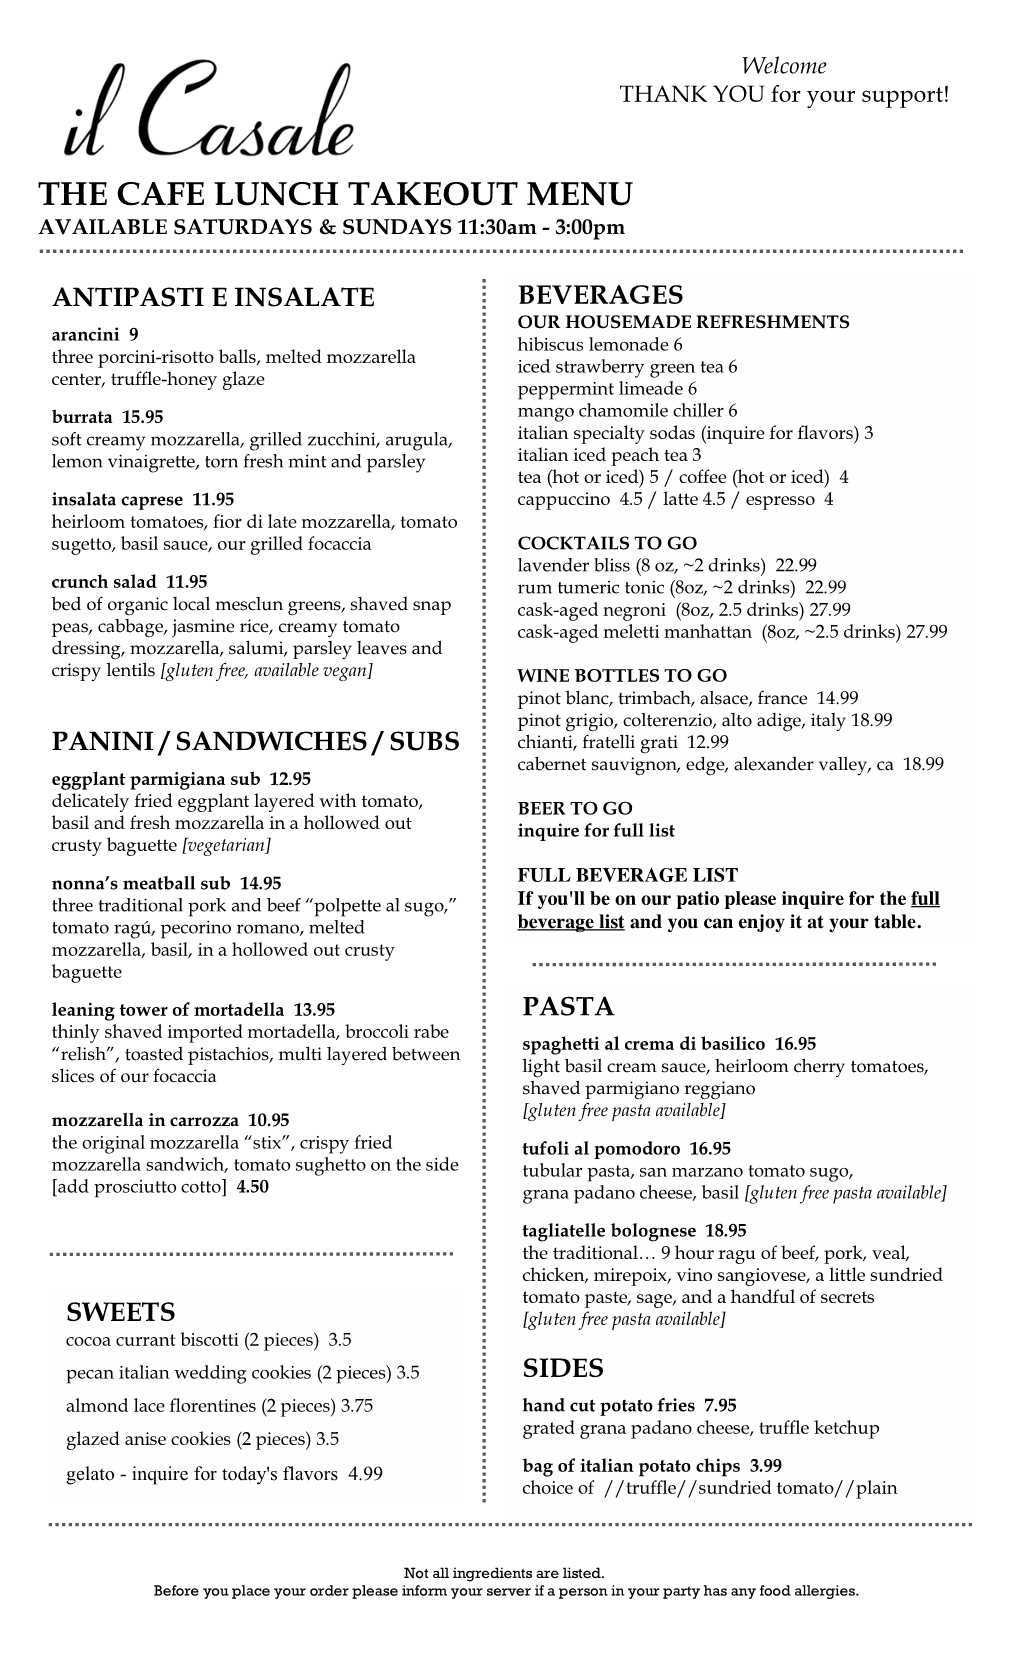 THE CAFE LUNCH TAKEOUT MENU AVAILABLE SATURDAYS & SUNDAYS 11:30Am - 3:00Pm